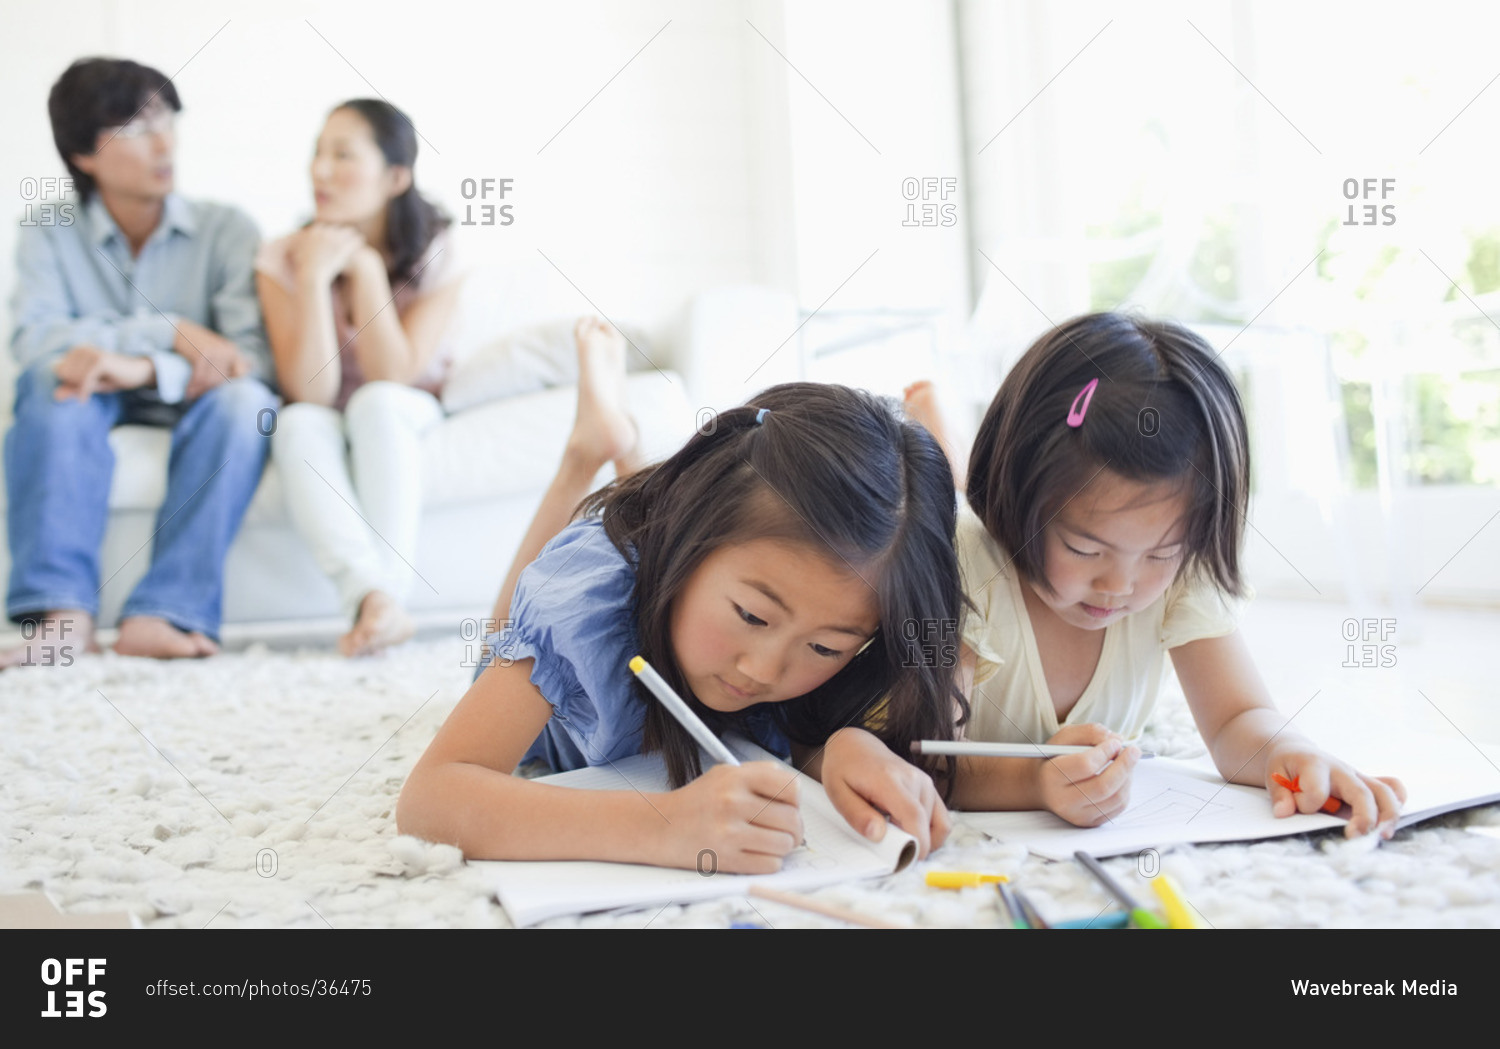 The parents chat on the couch as the girls lie on the ground and color in their coloring books